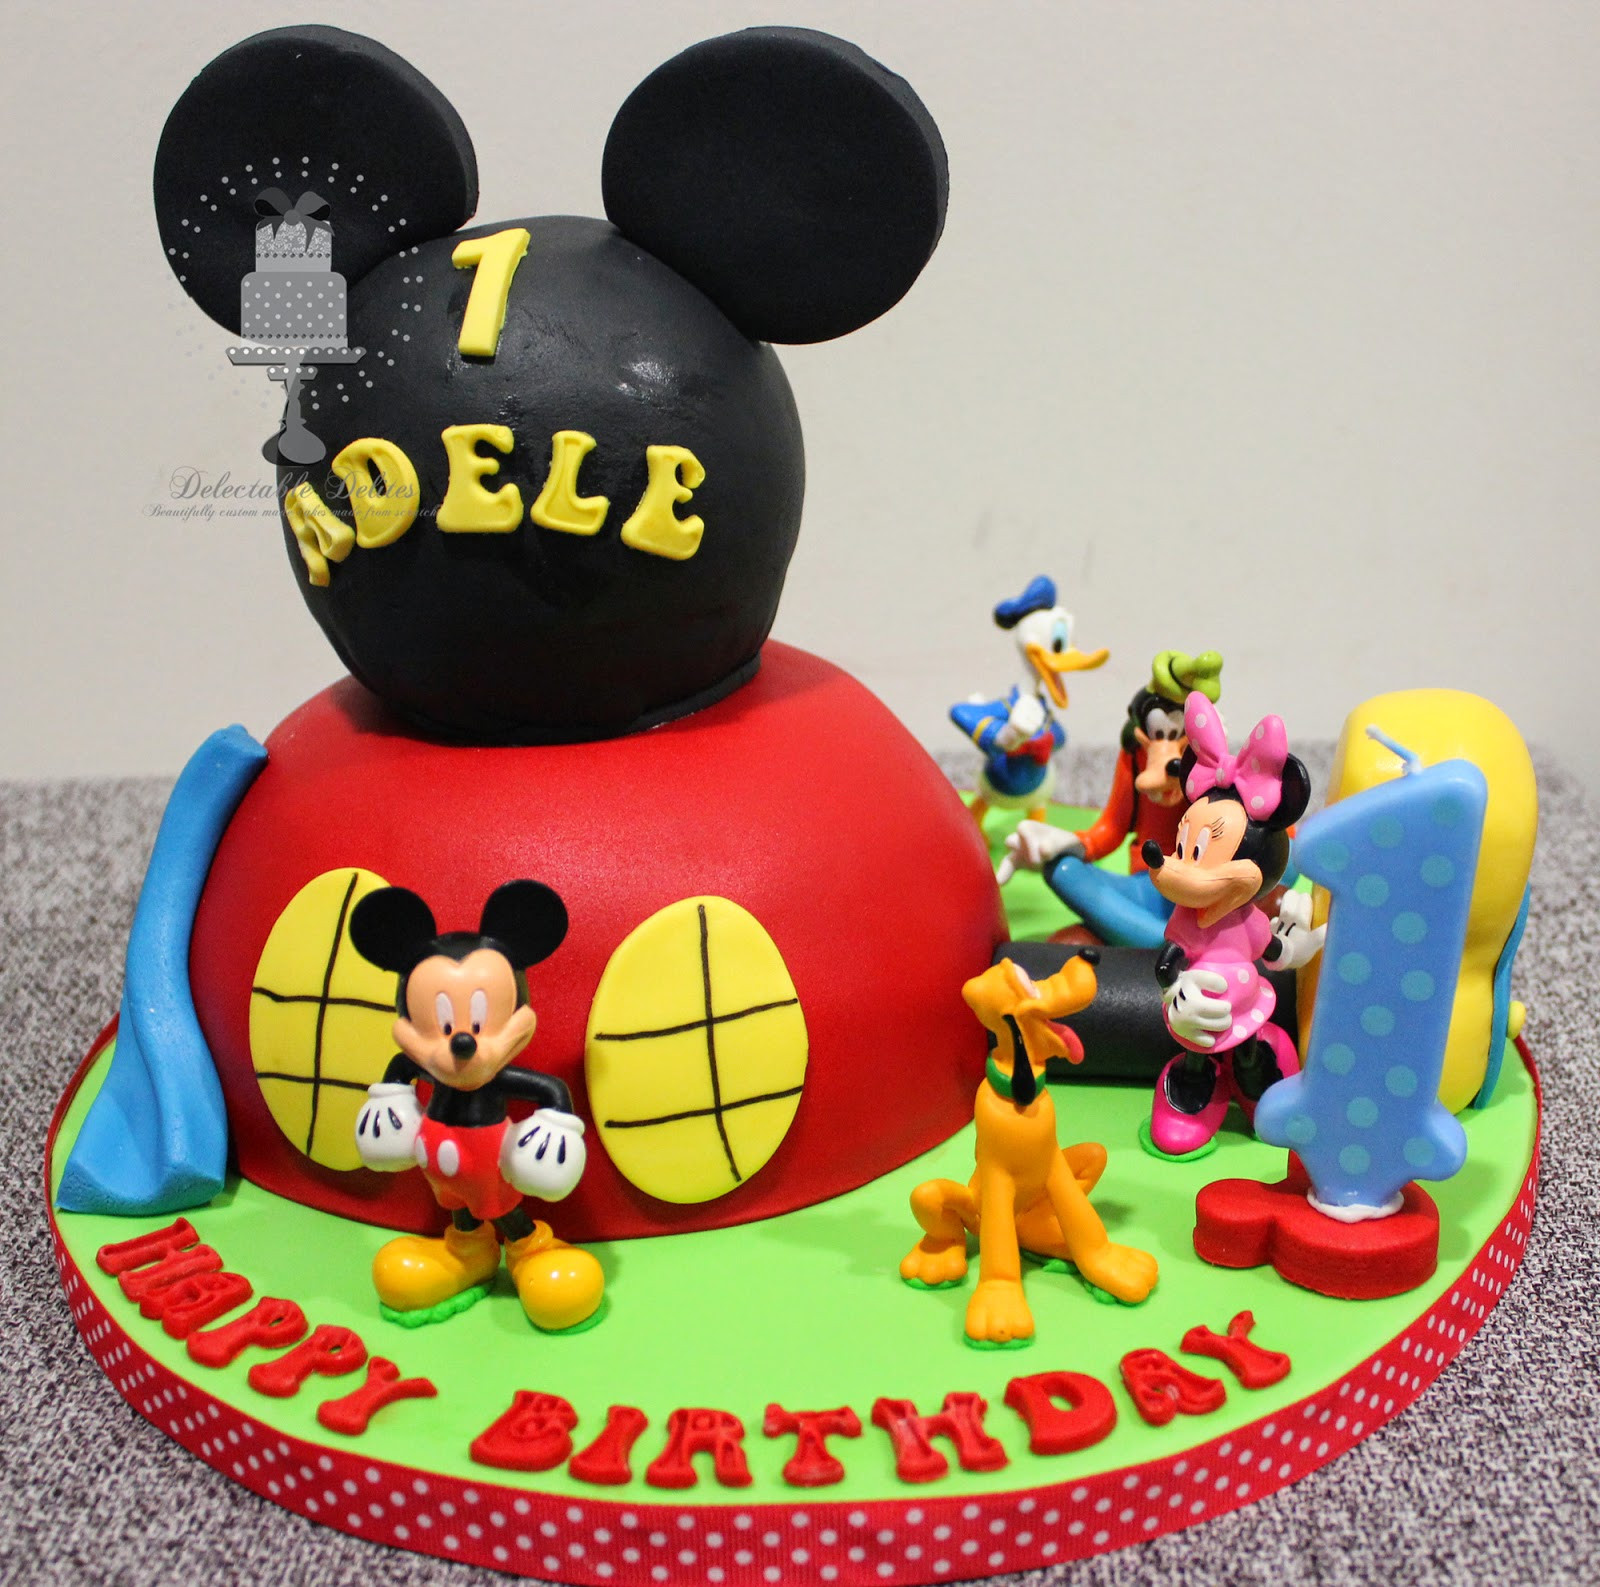 Mickey Mouse 1st Birthday Cake
 Delectable Delites Mickey mouse clubhouse cake for Adele